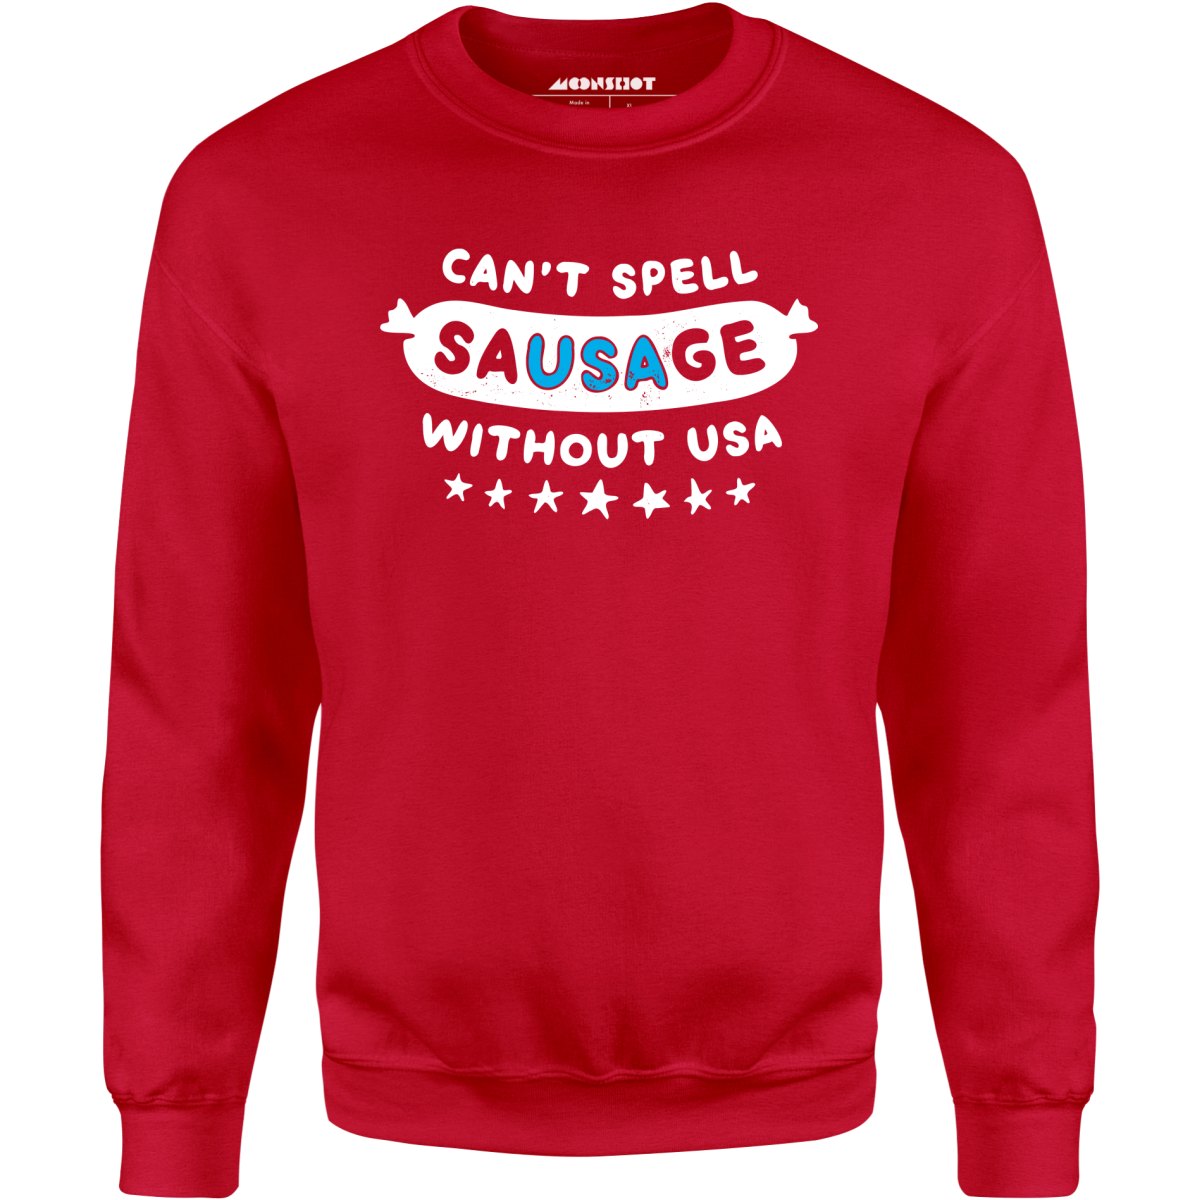 Can't Spell Sausage Without USA - Unisex Sweatshirt